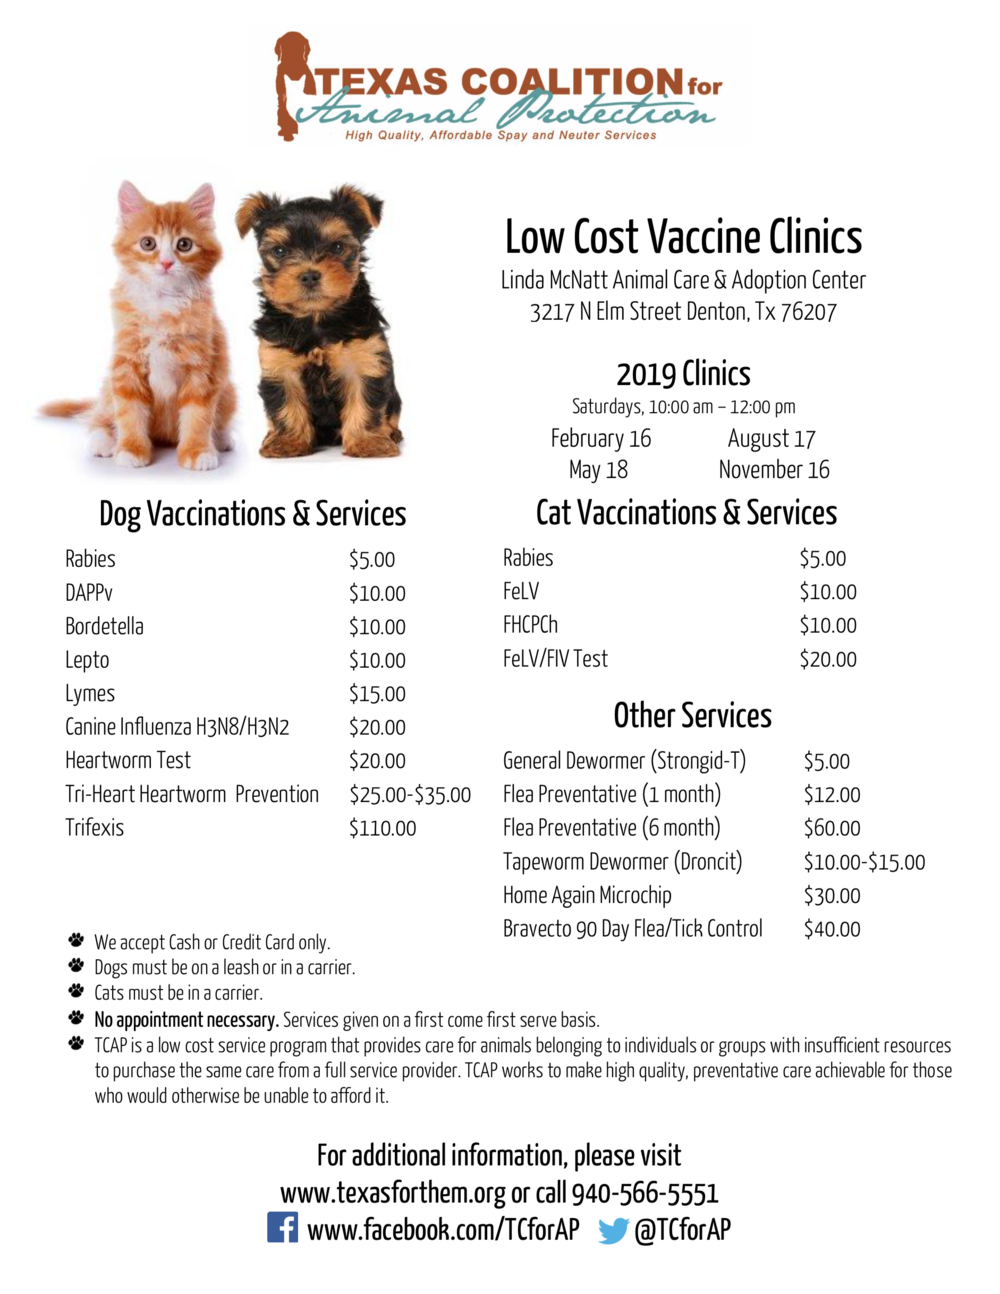 TCAP+Low+Cost+Vaccine+Clinic+Flyer?format=1000w